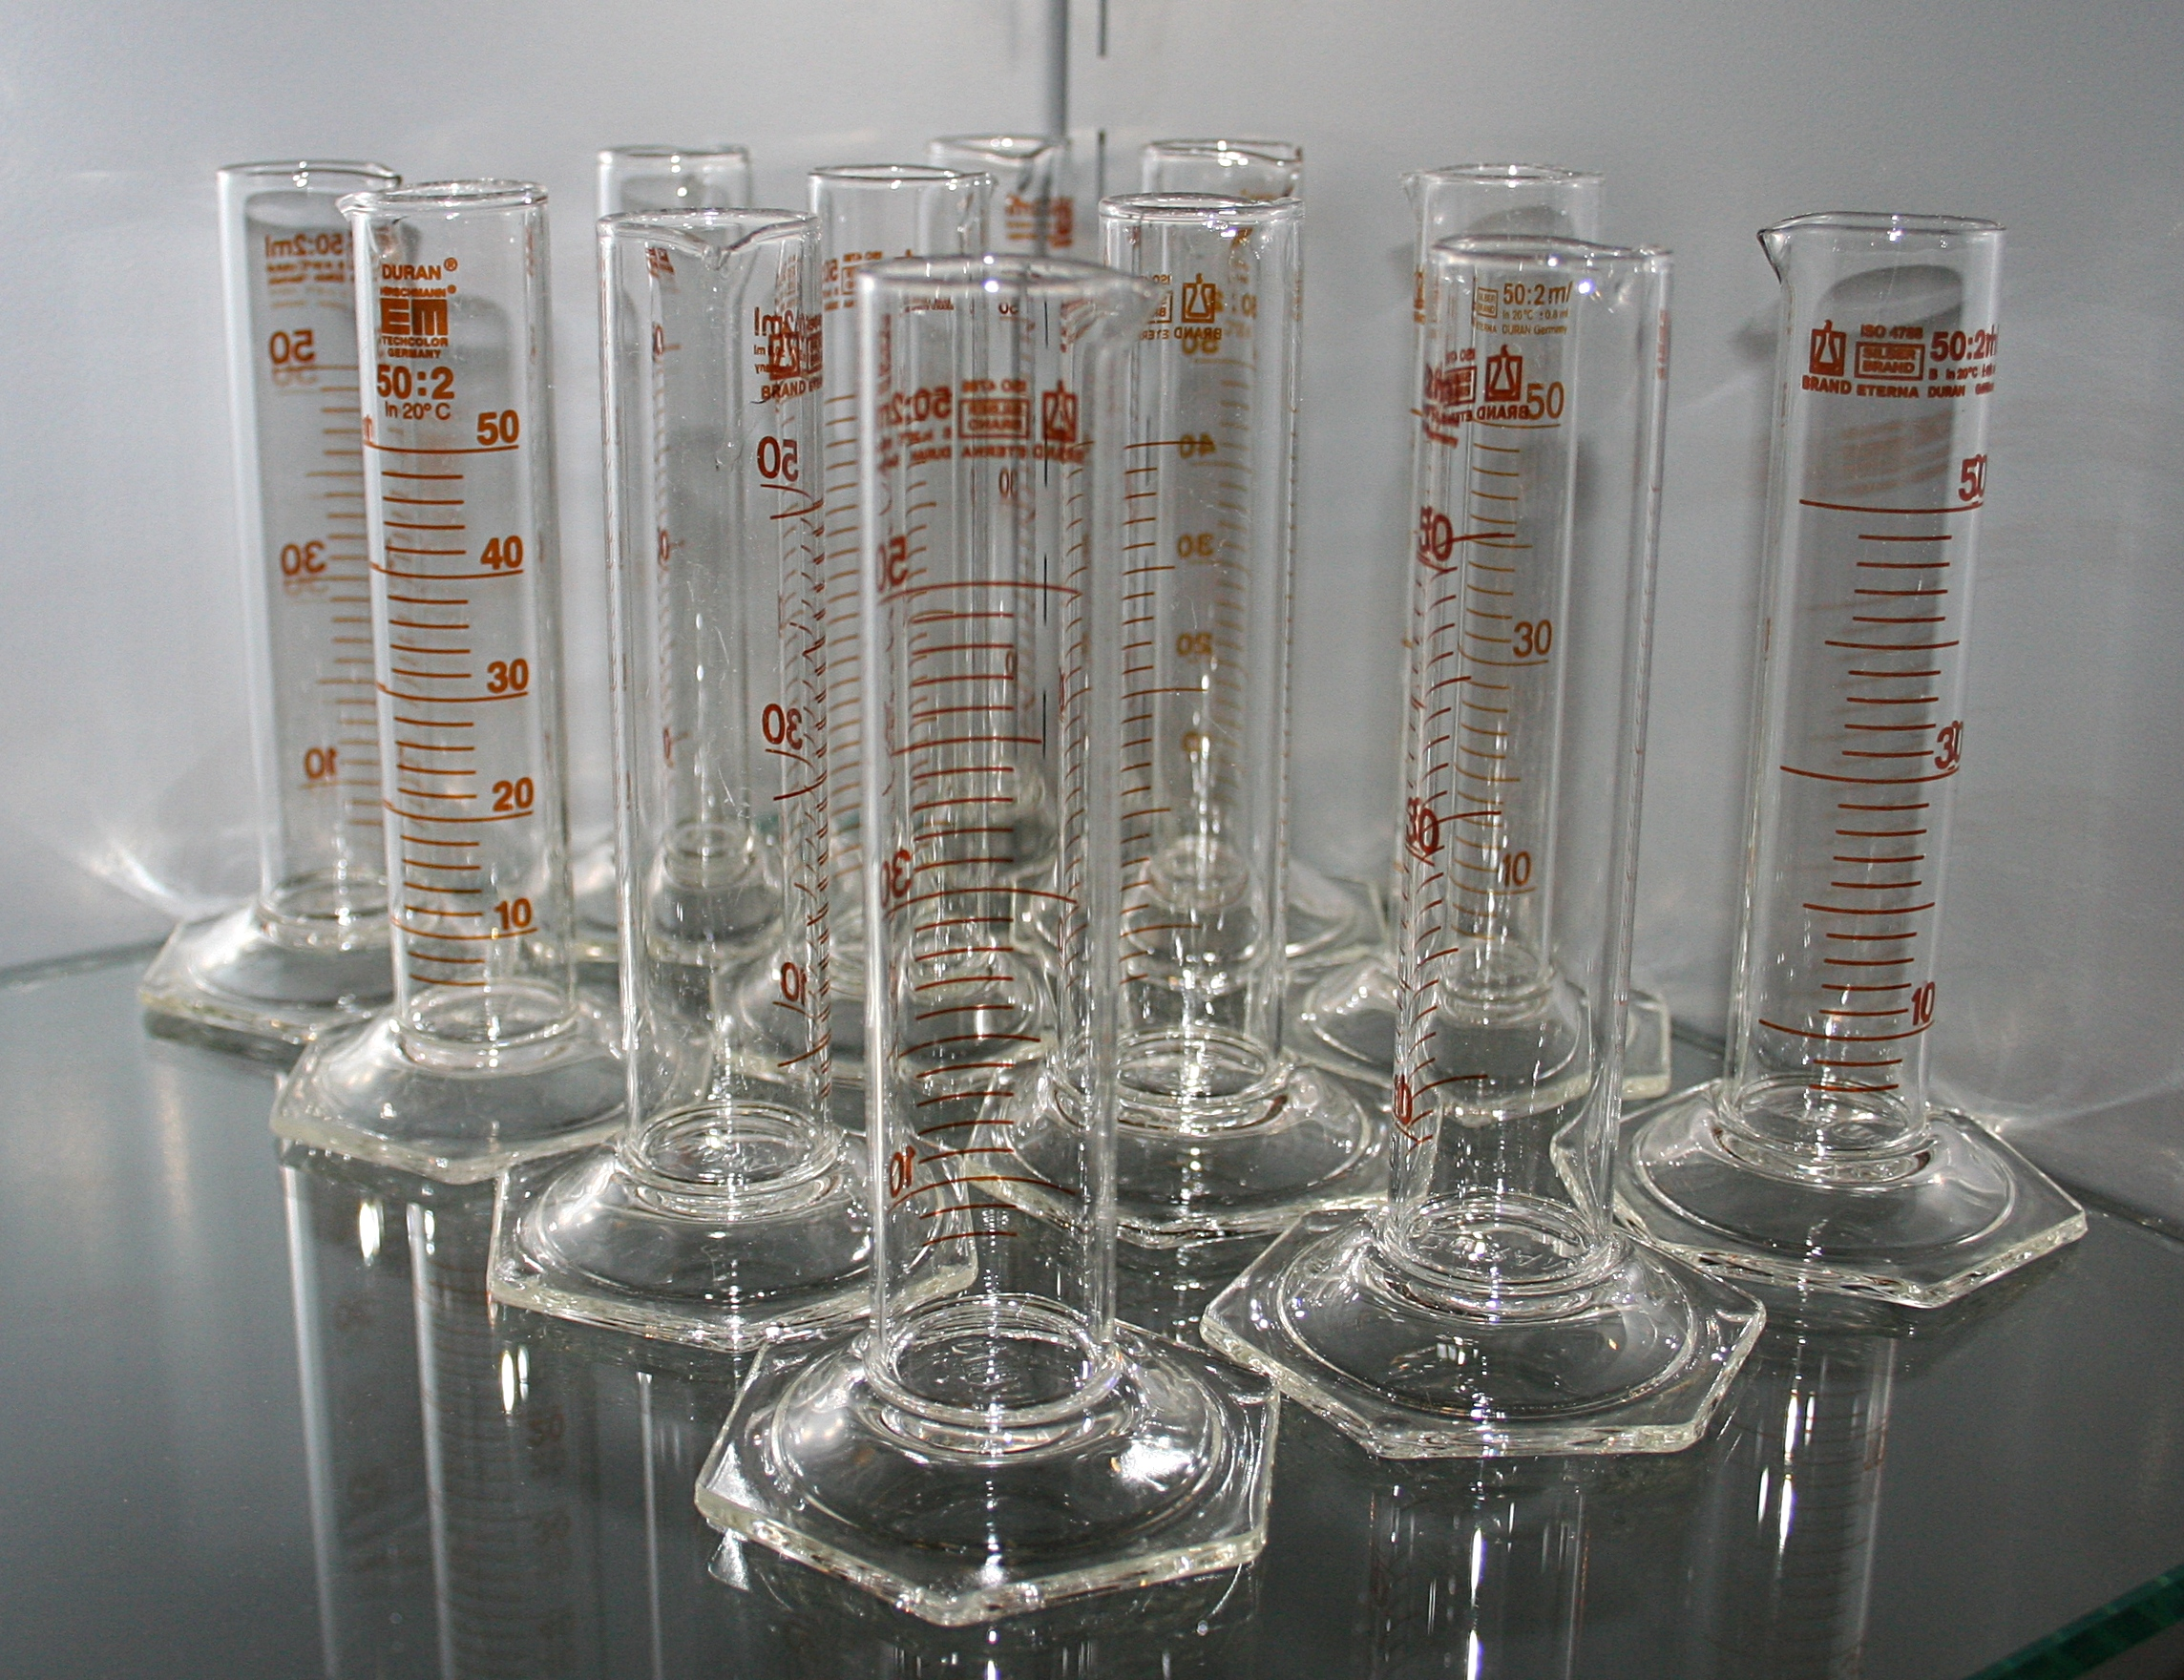 Selection of popular 50 ml graduated cylinder brands